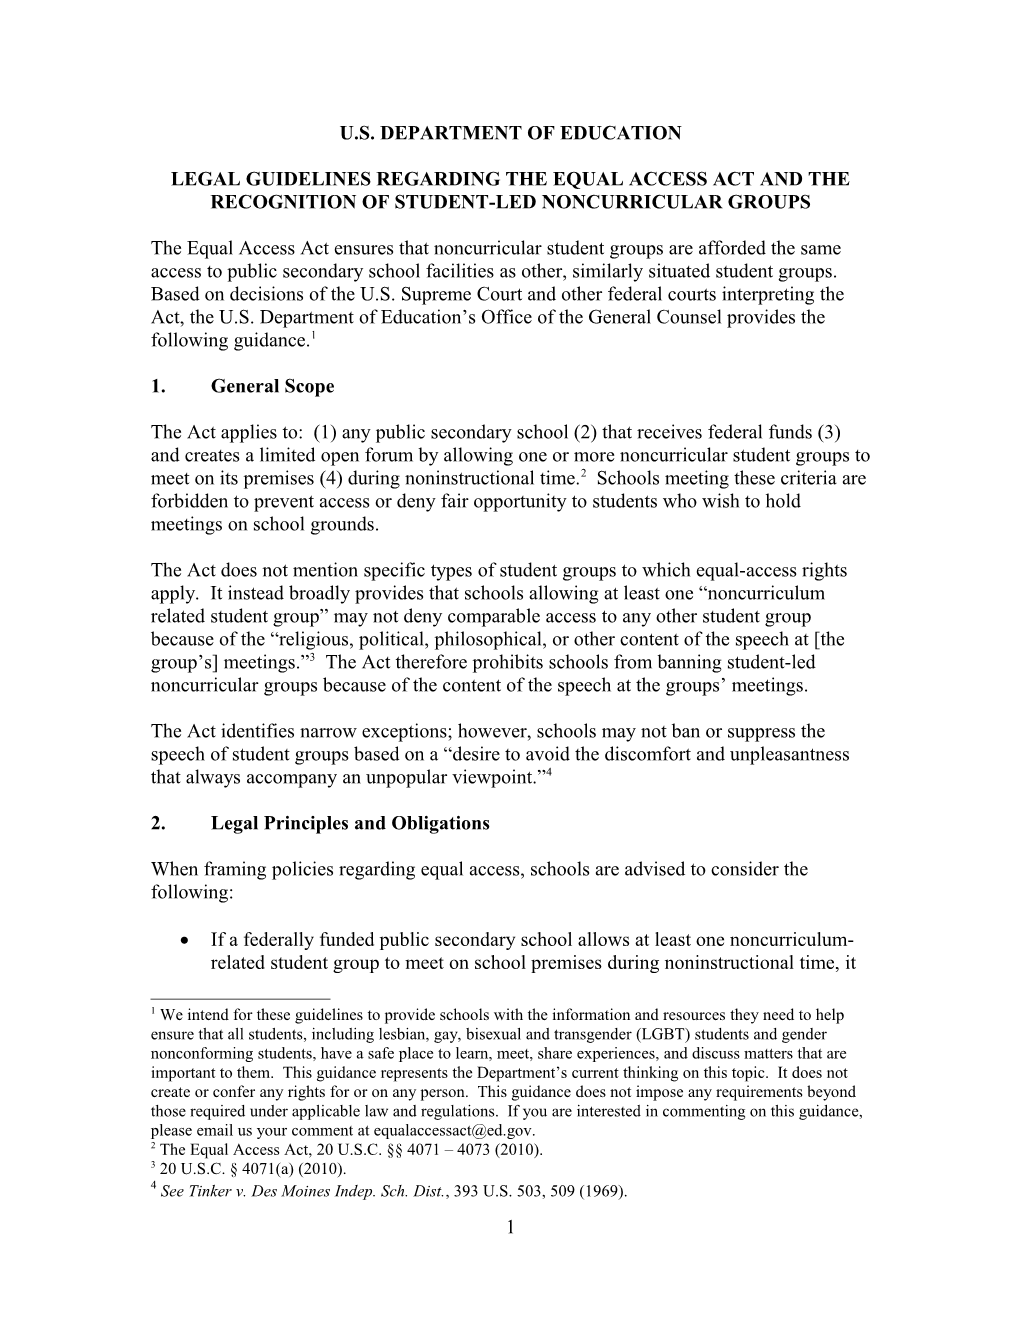 Legal Guidelines Regarding the Equal Access Act and the Recognition of Student-Led